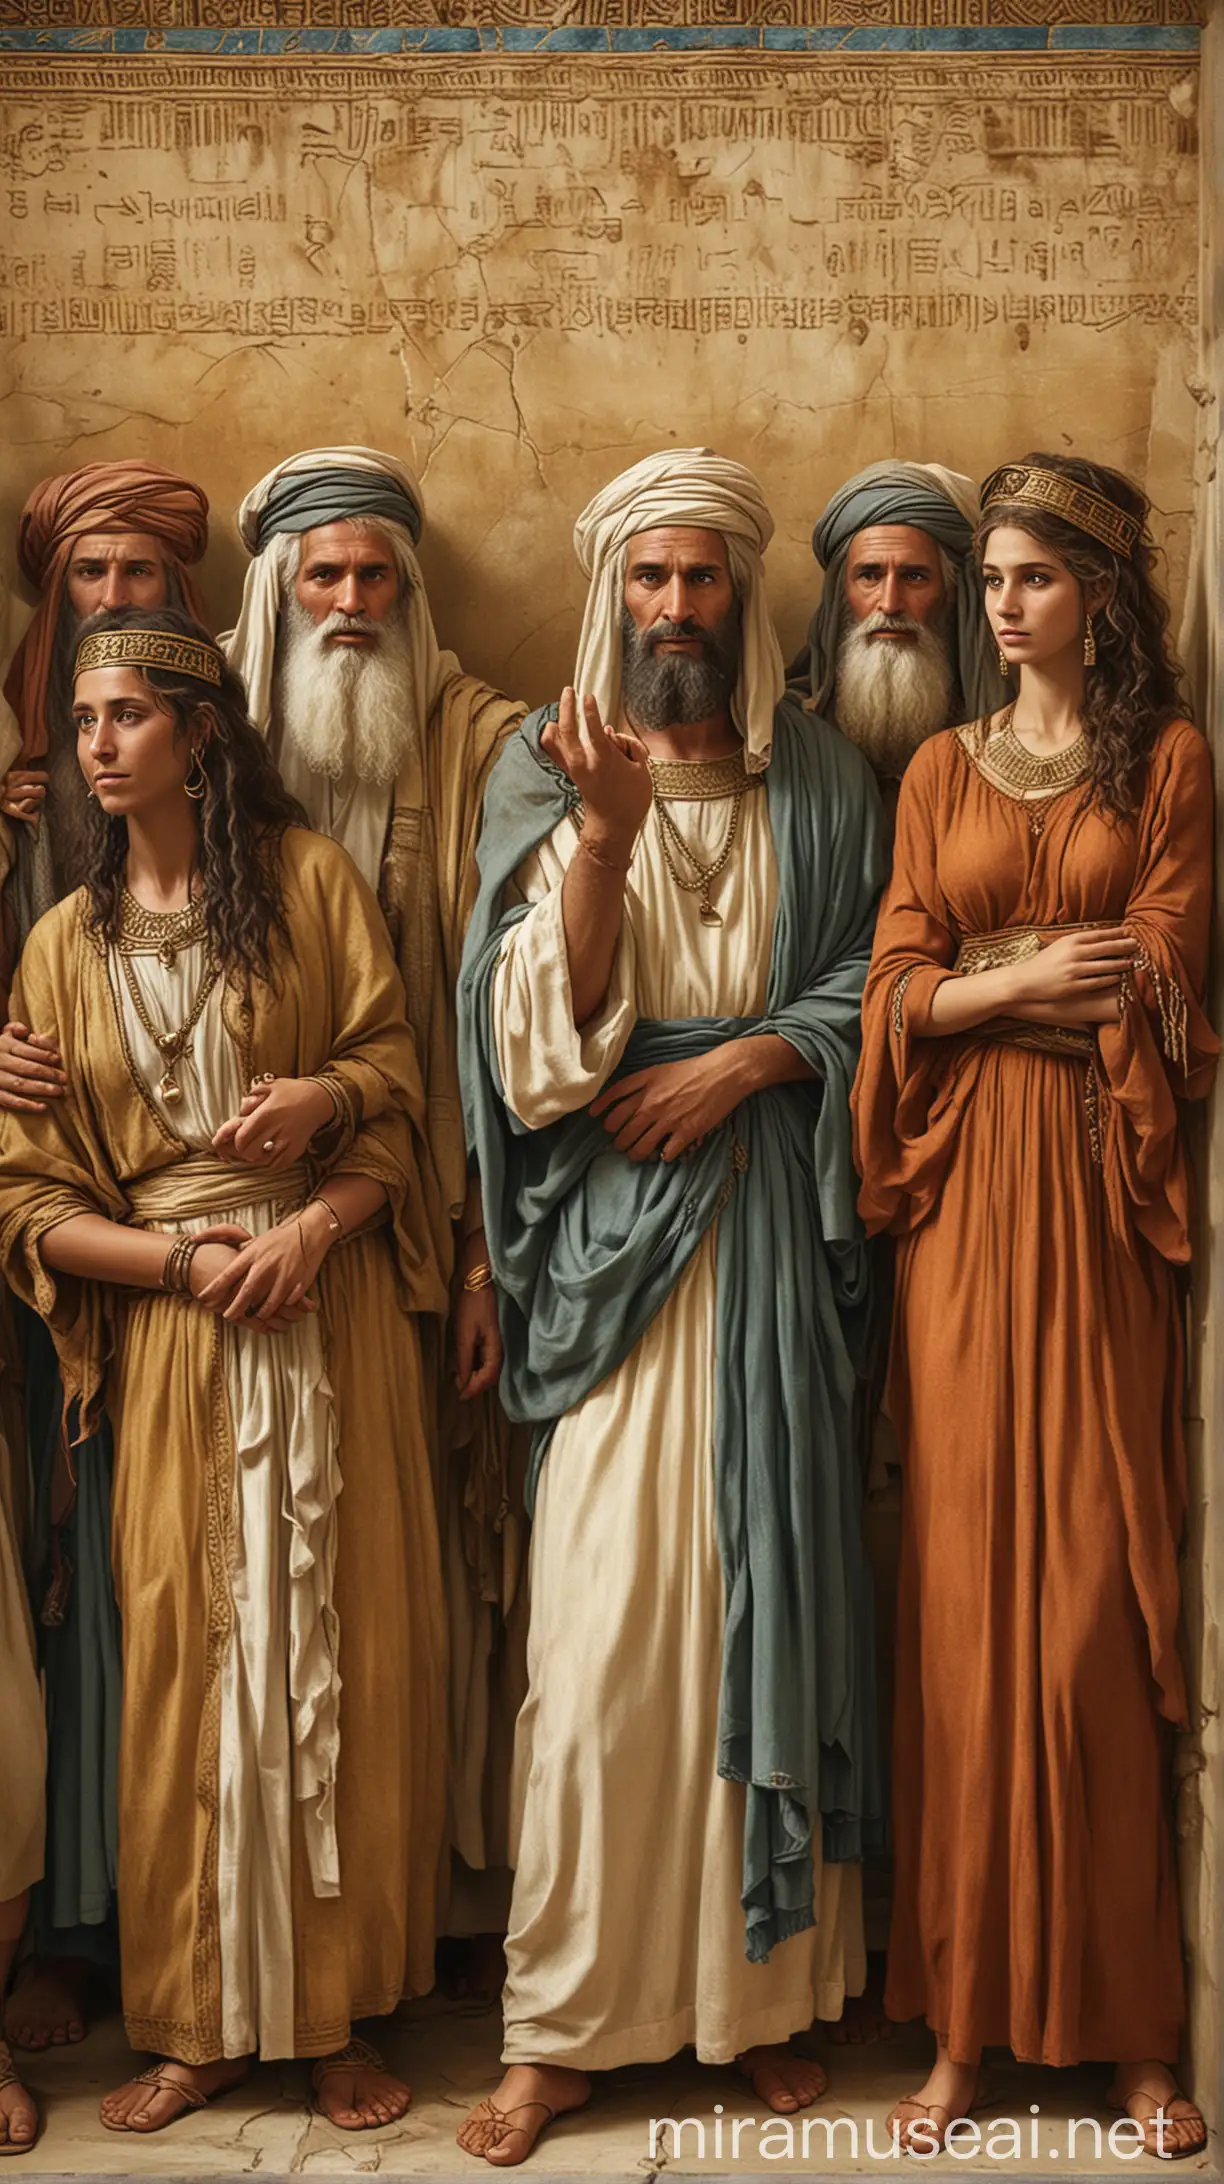 Ancient Israelites Avoiding Intermarriage with Foreigners